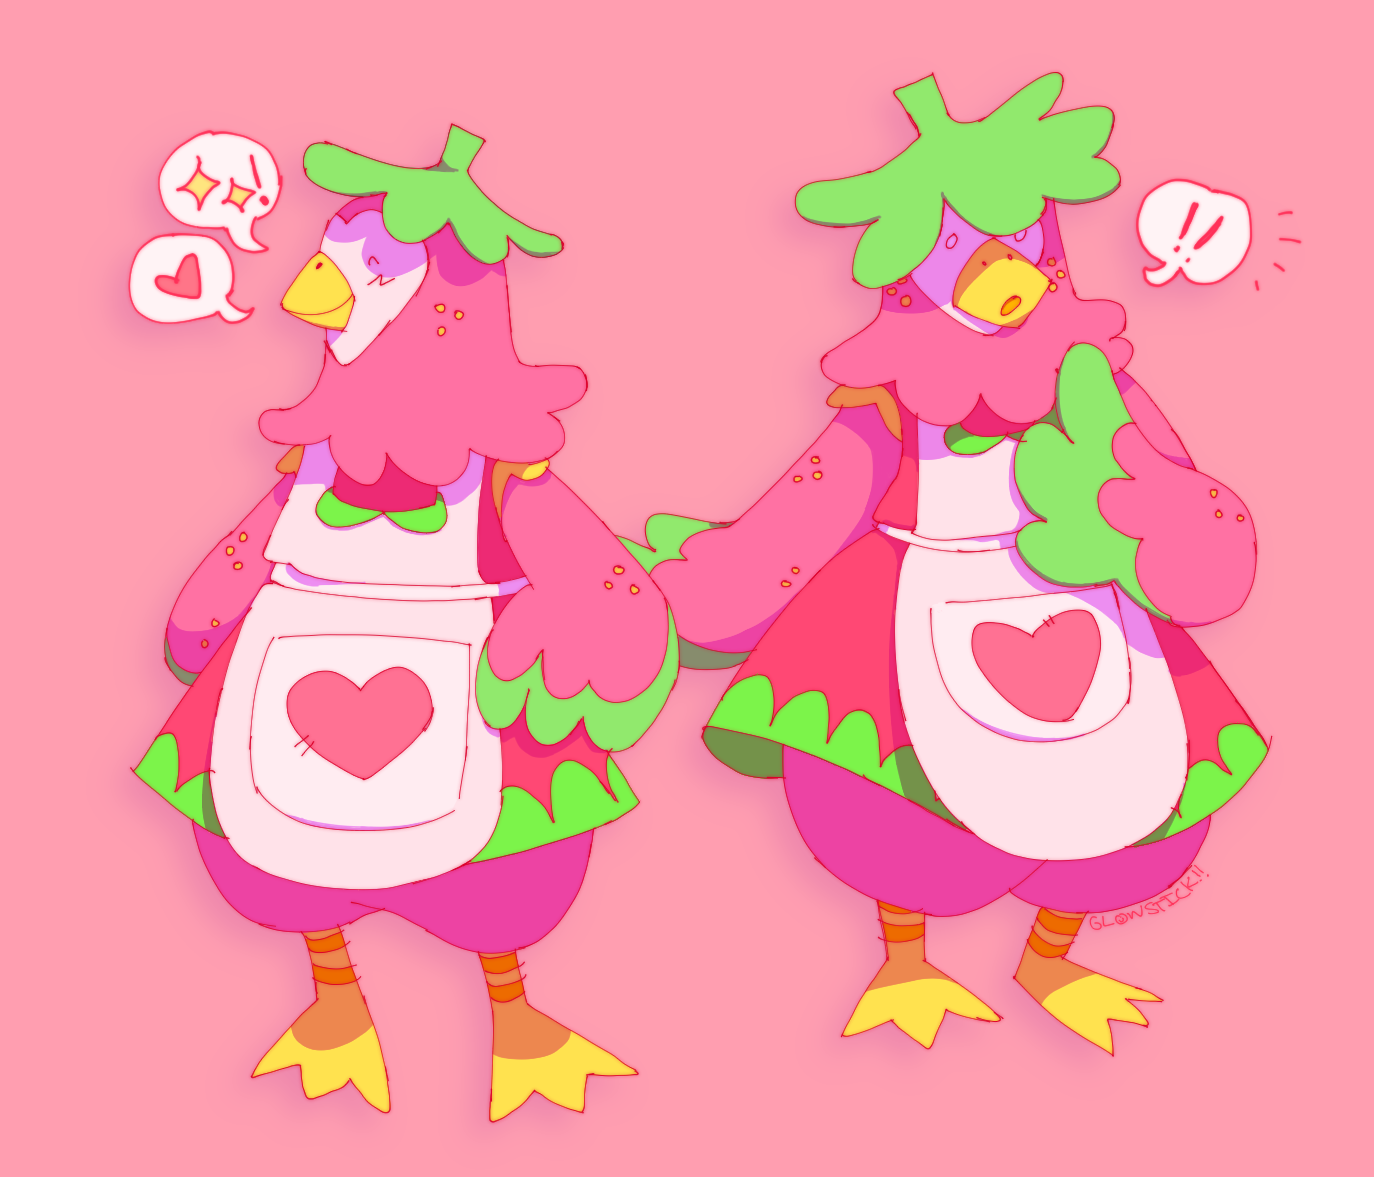 Two drawings of an anthropomorphic chicken stylized with strawberry elements. Her feathers are pink & she has yellow freckles. She is wearing a leaf-like hat, a pink dress, and a white apron.